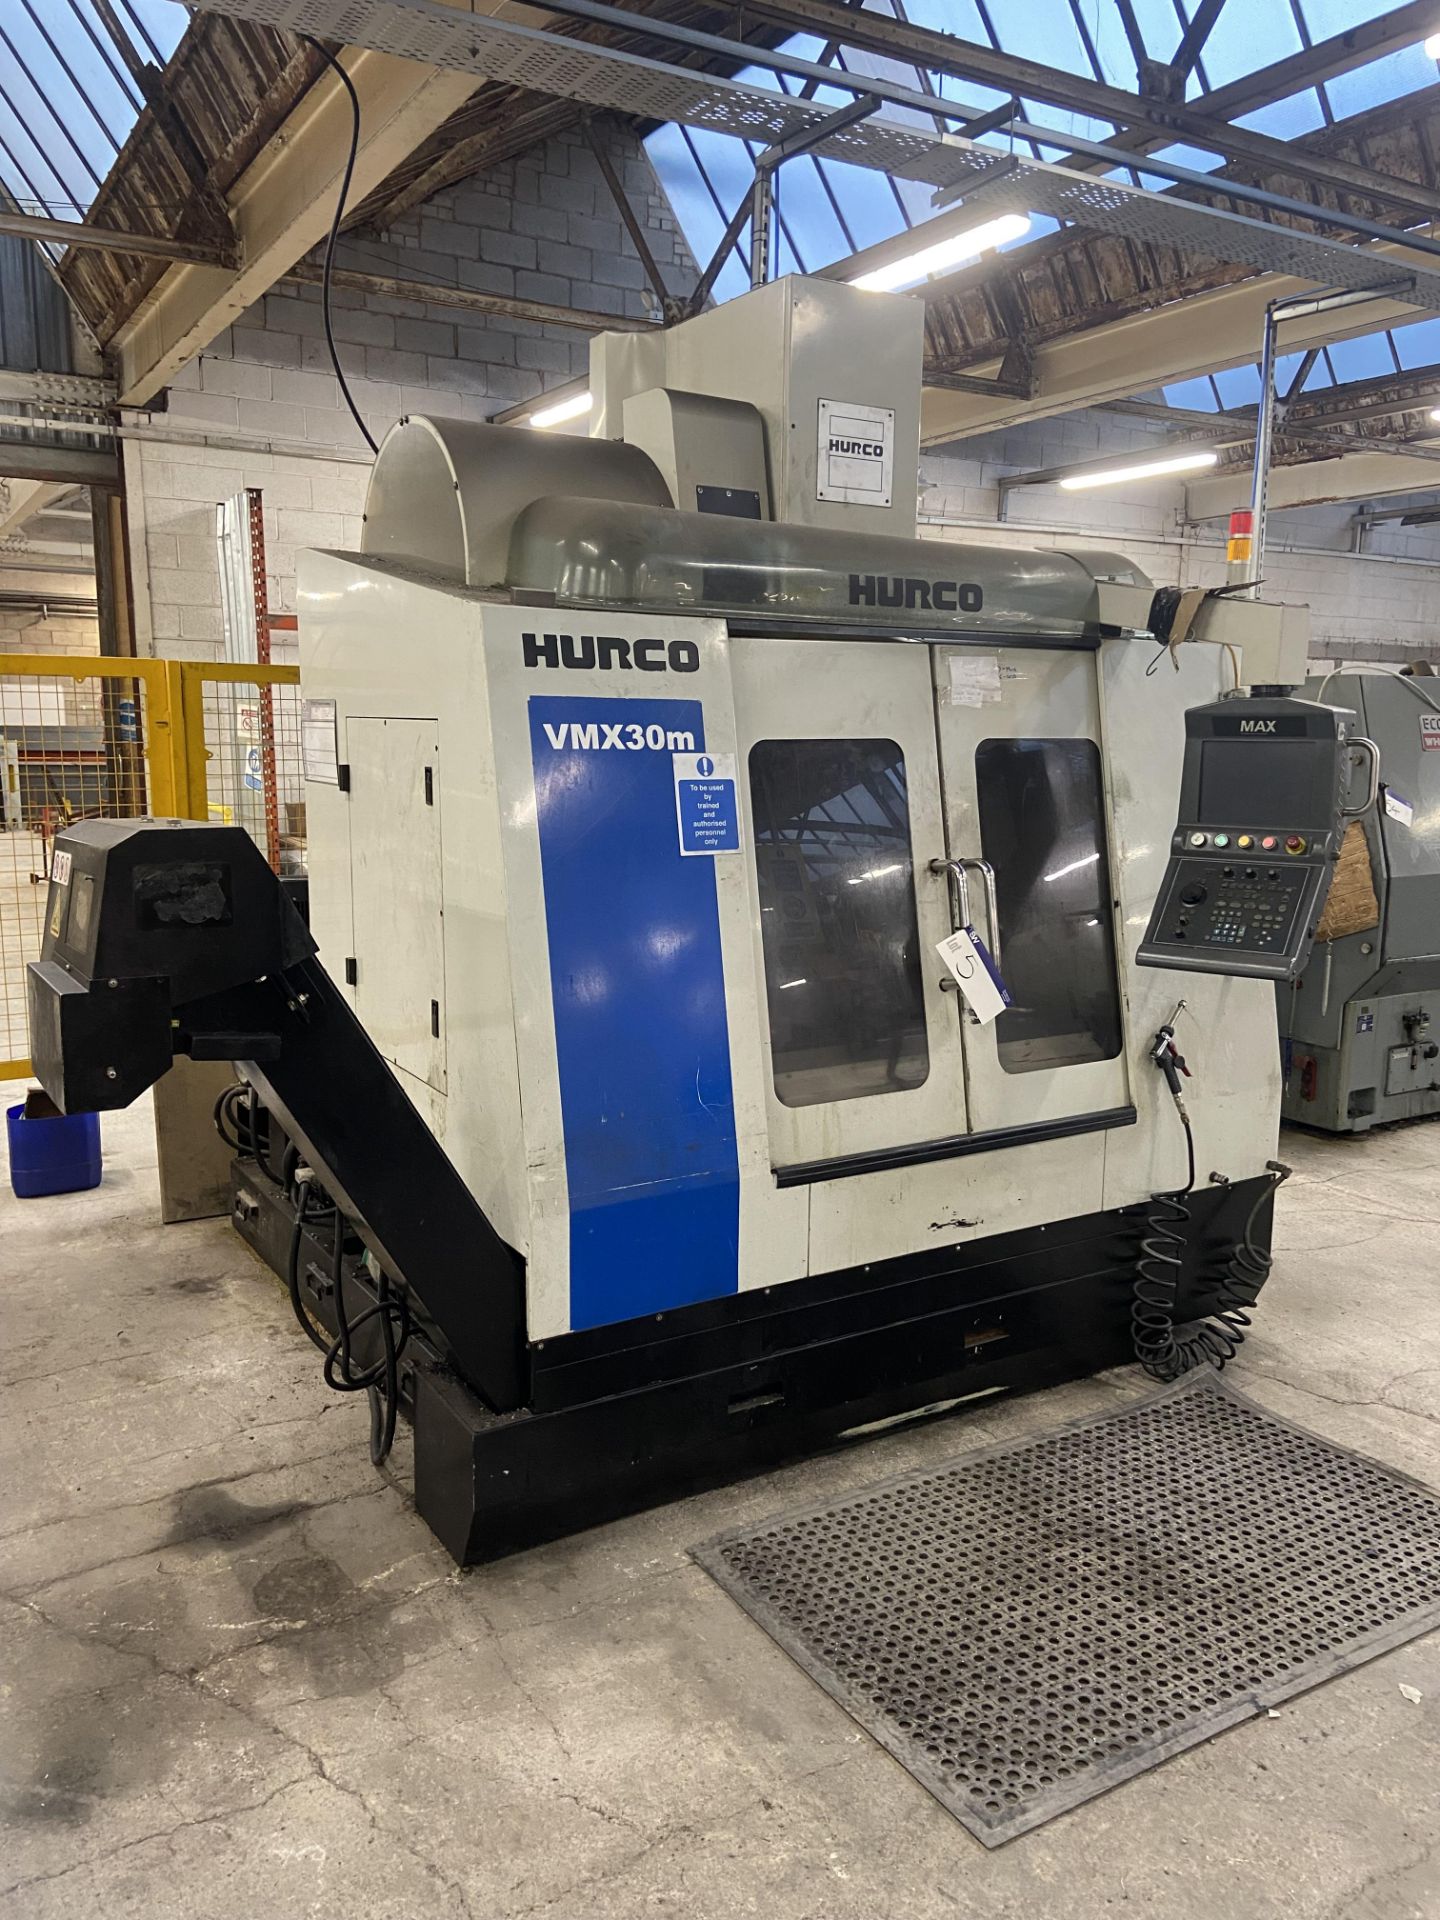 Hurco VMX30m VERTICAL MACHINING CENTRE, serial no. H-S30126, year of manufacture 2011, with Max